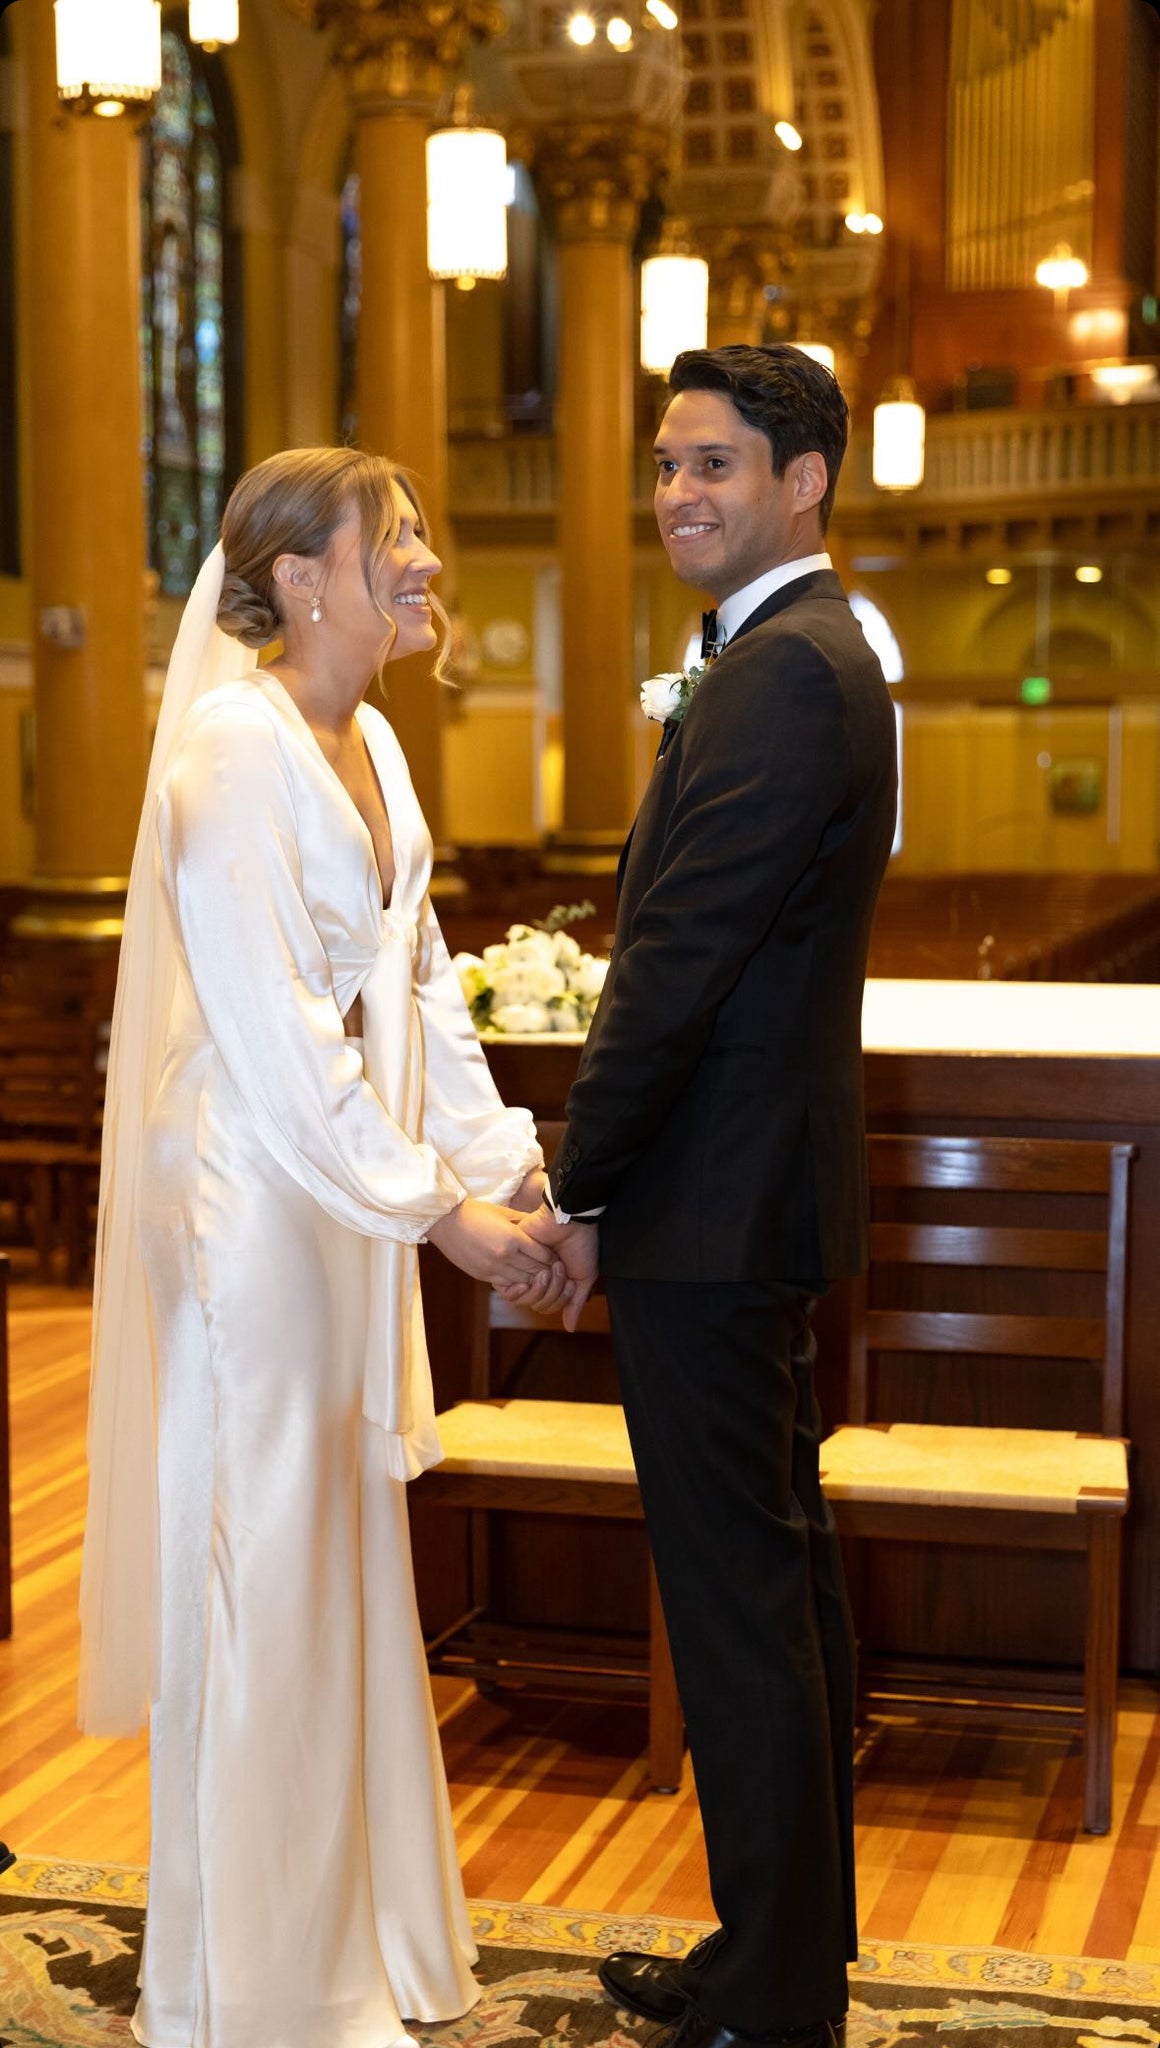 Couple married in church - bride wearing tie front bridal dress with veil